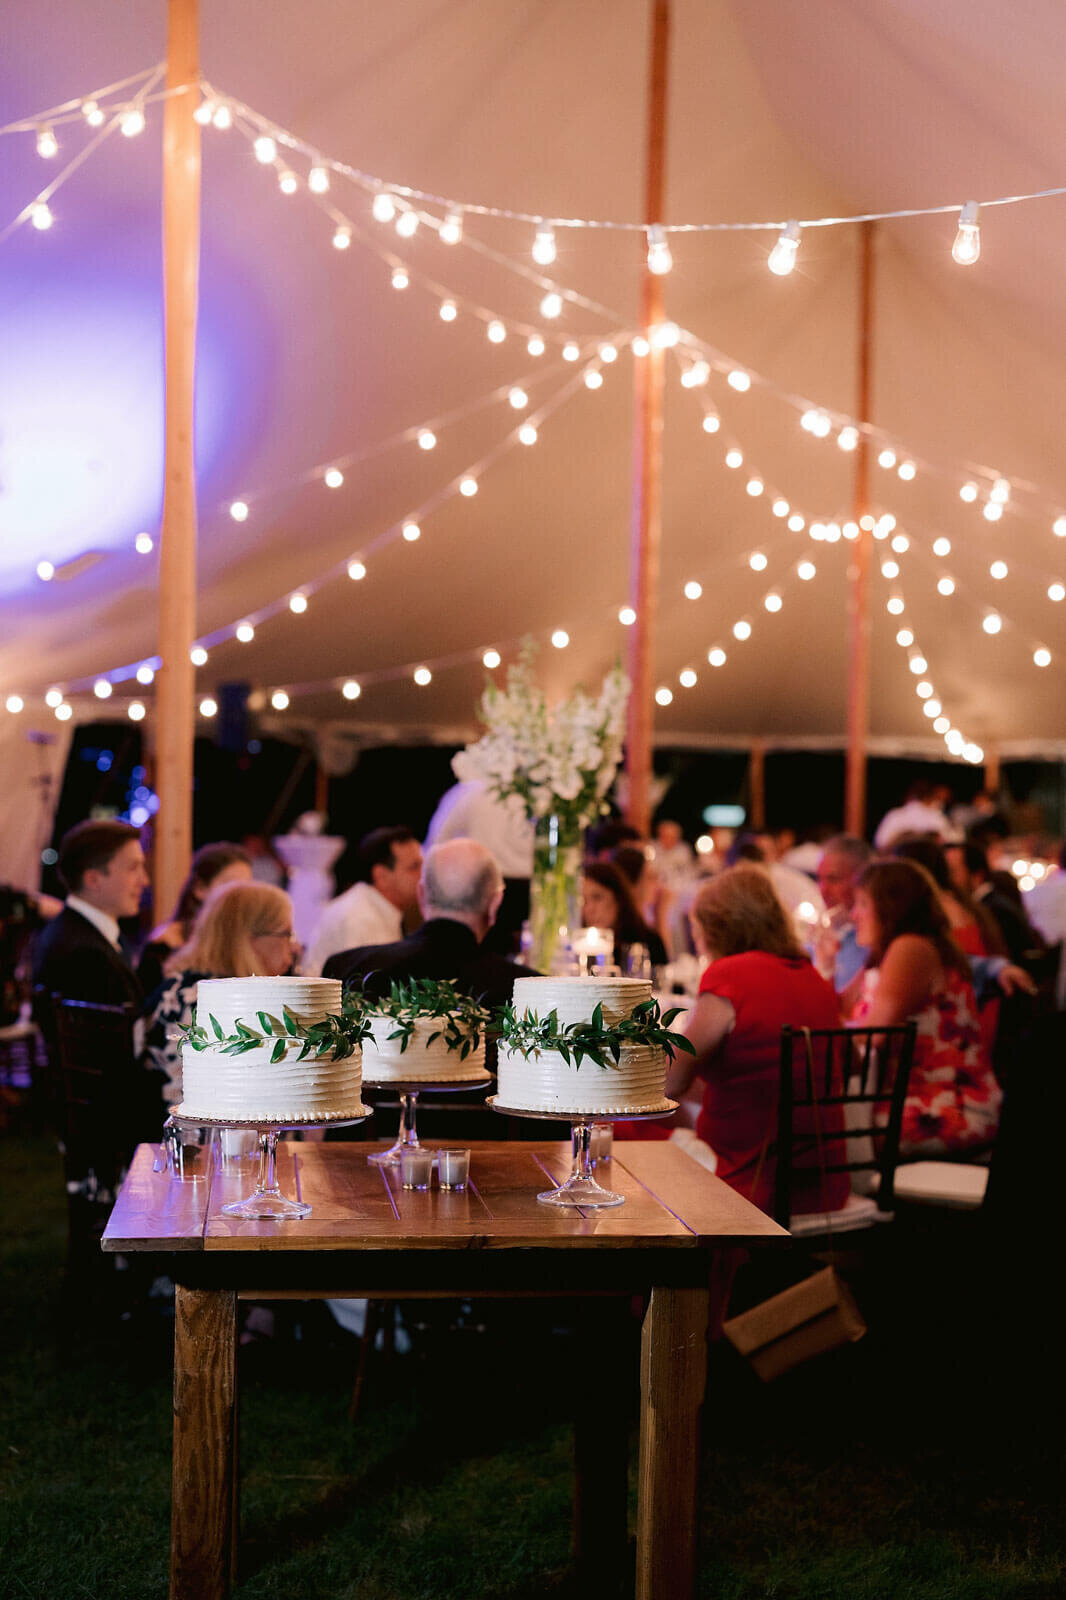 Three white wedding cakes are placed on a wooden table, while the guests are in the background in Cape Cod Summer Tent, MA.